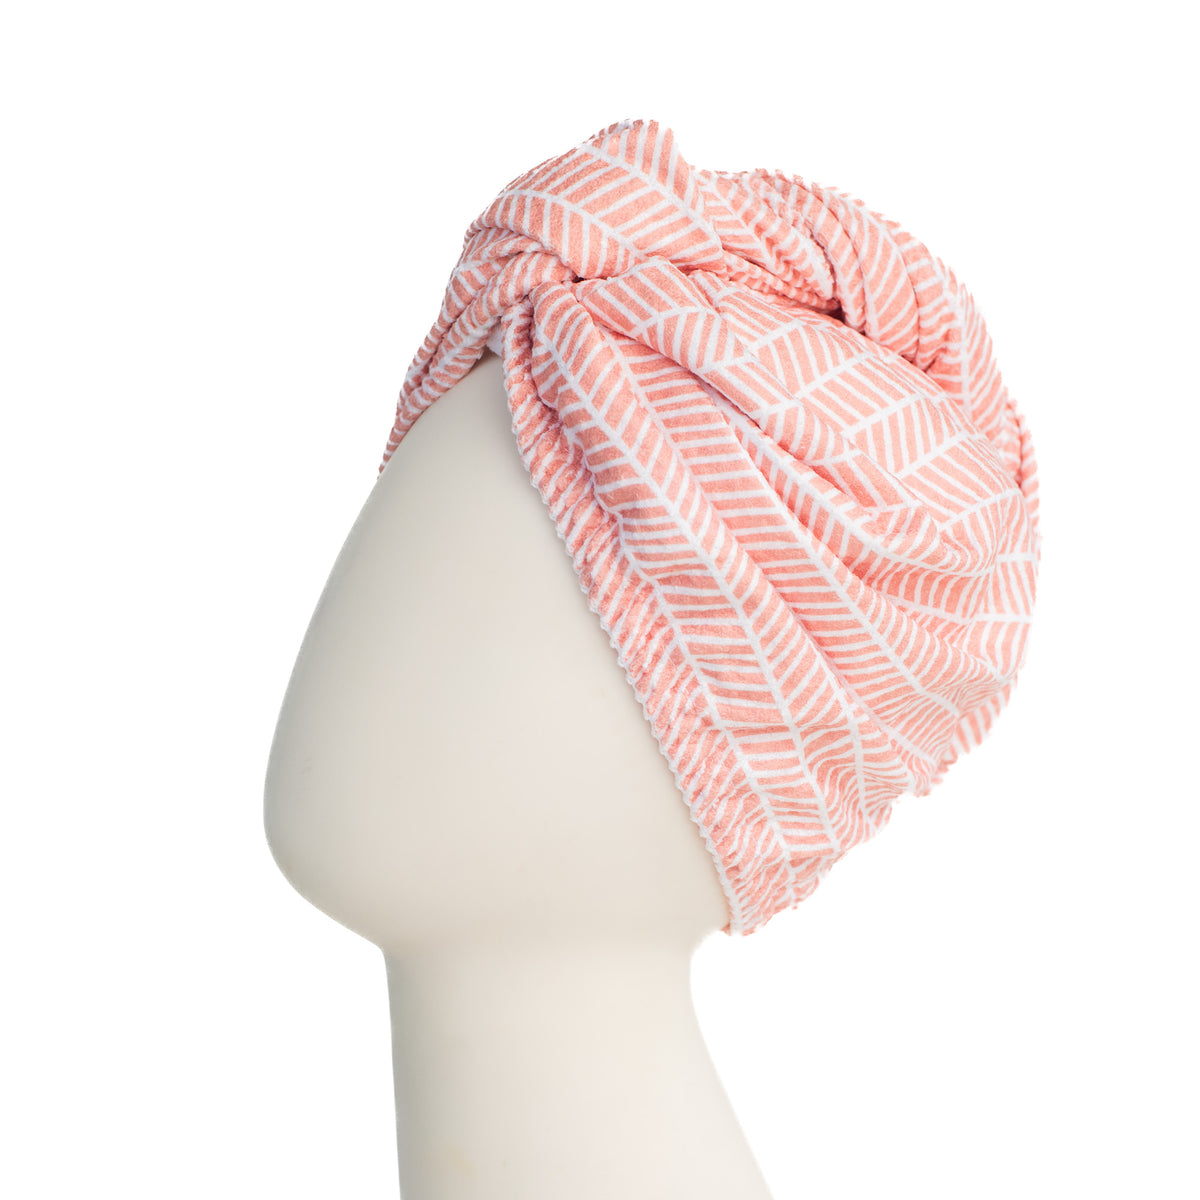 Hair Towel Wrap - Branches in Pink